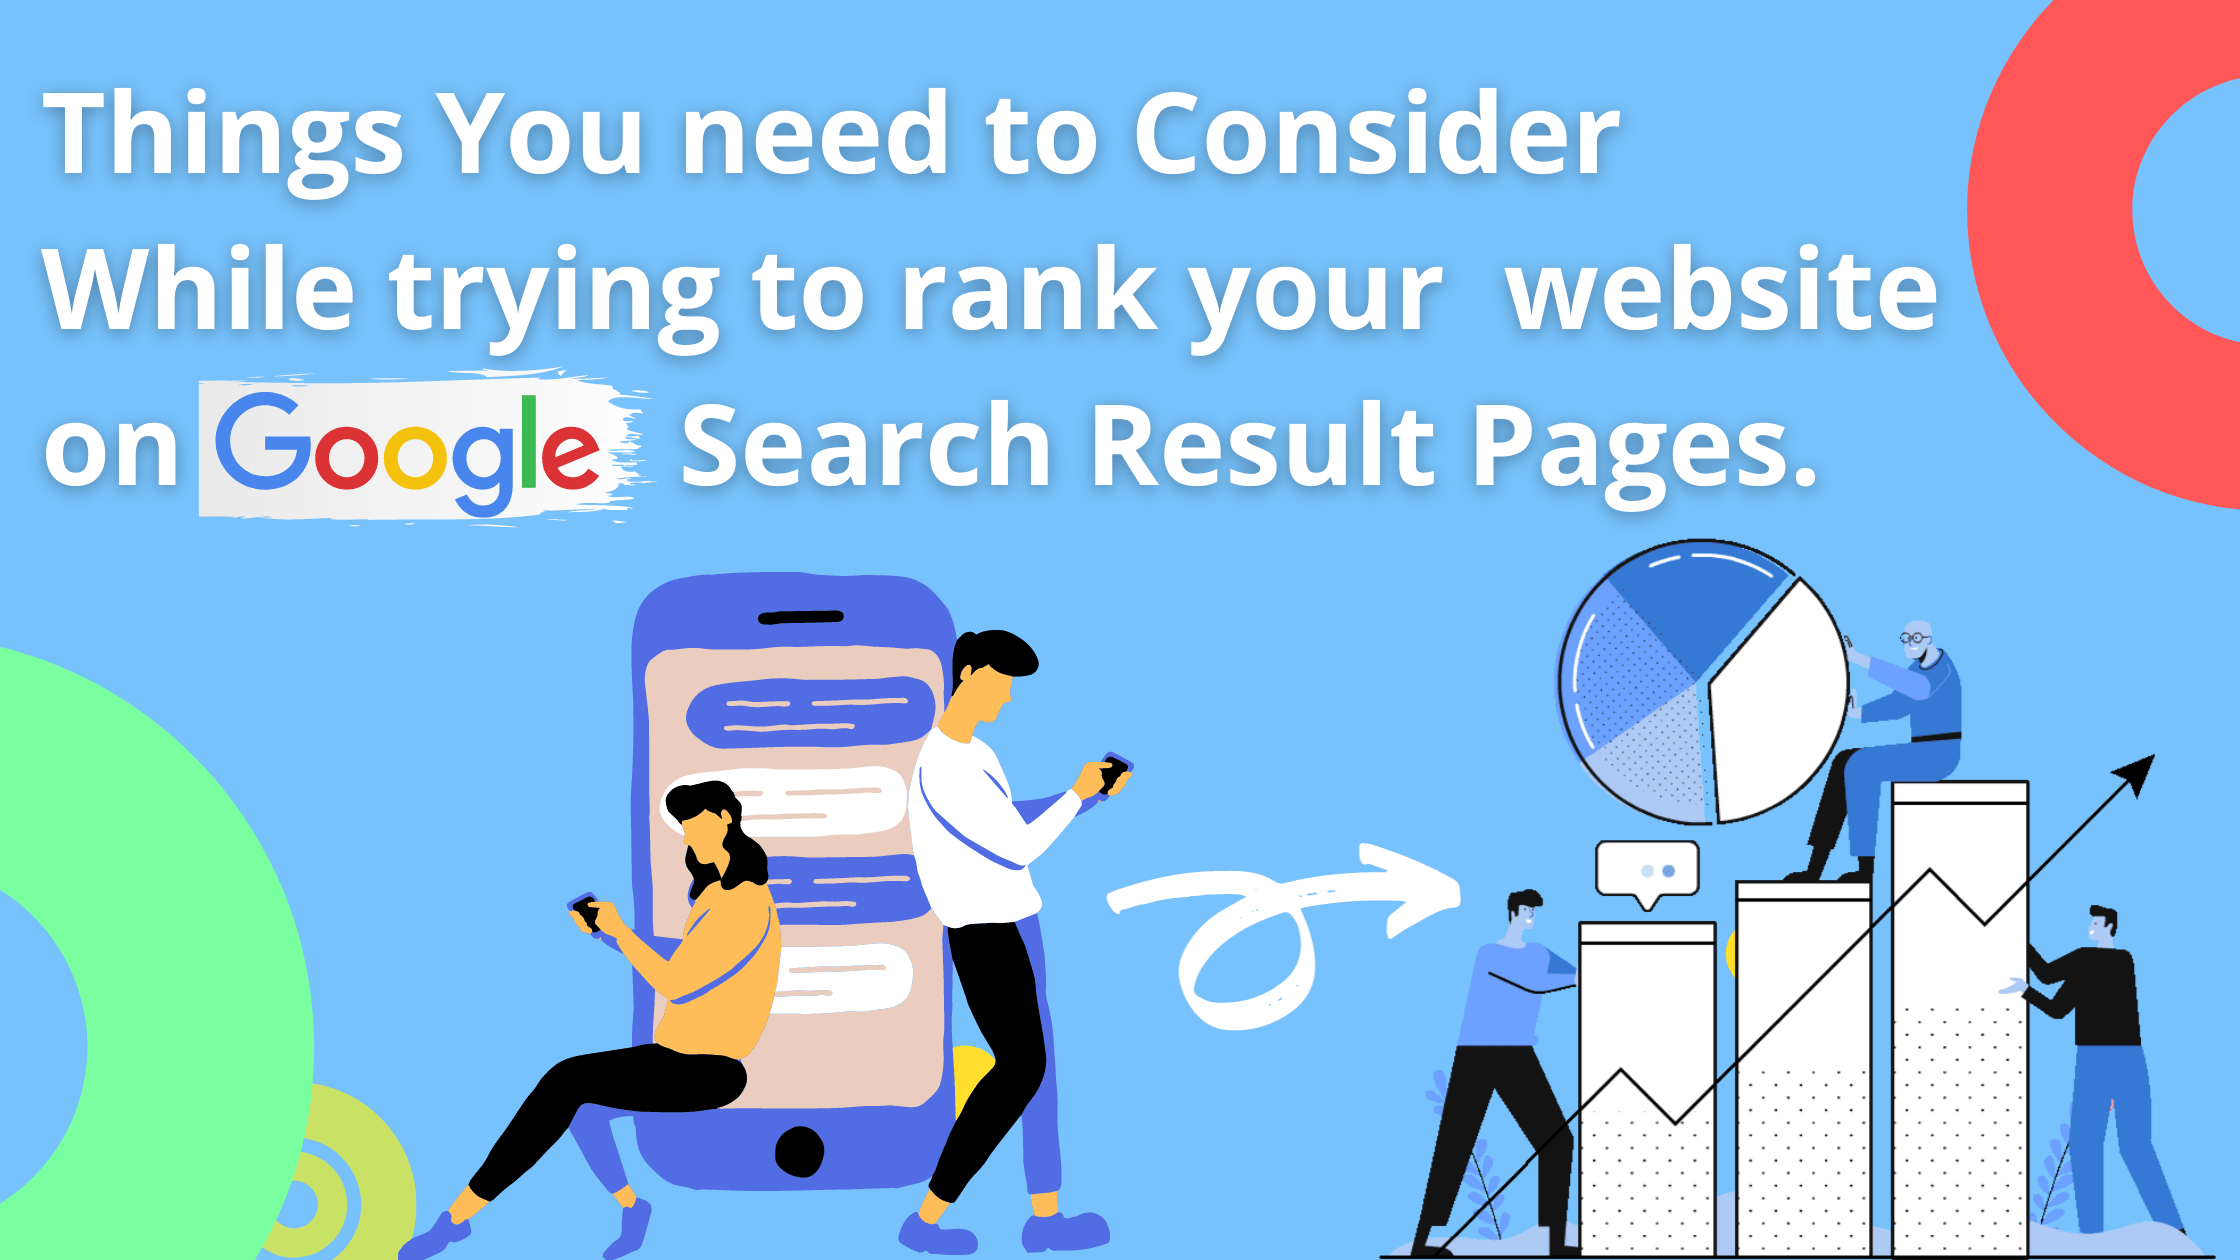 Things to consider to rank your blog or website on Google SERP